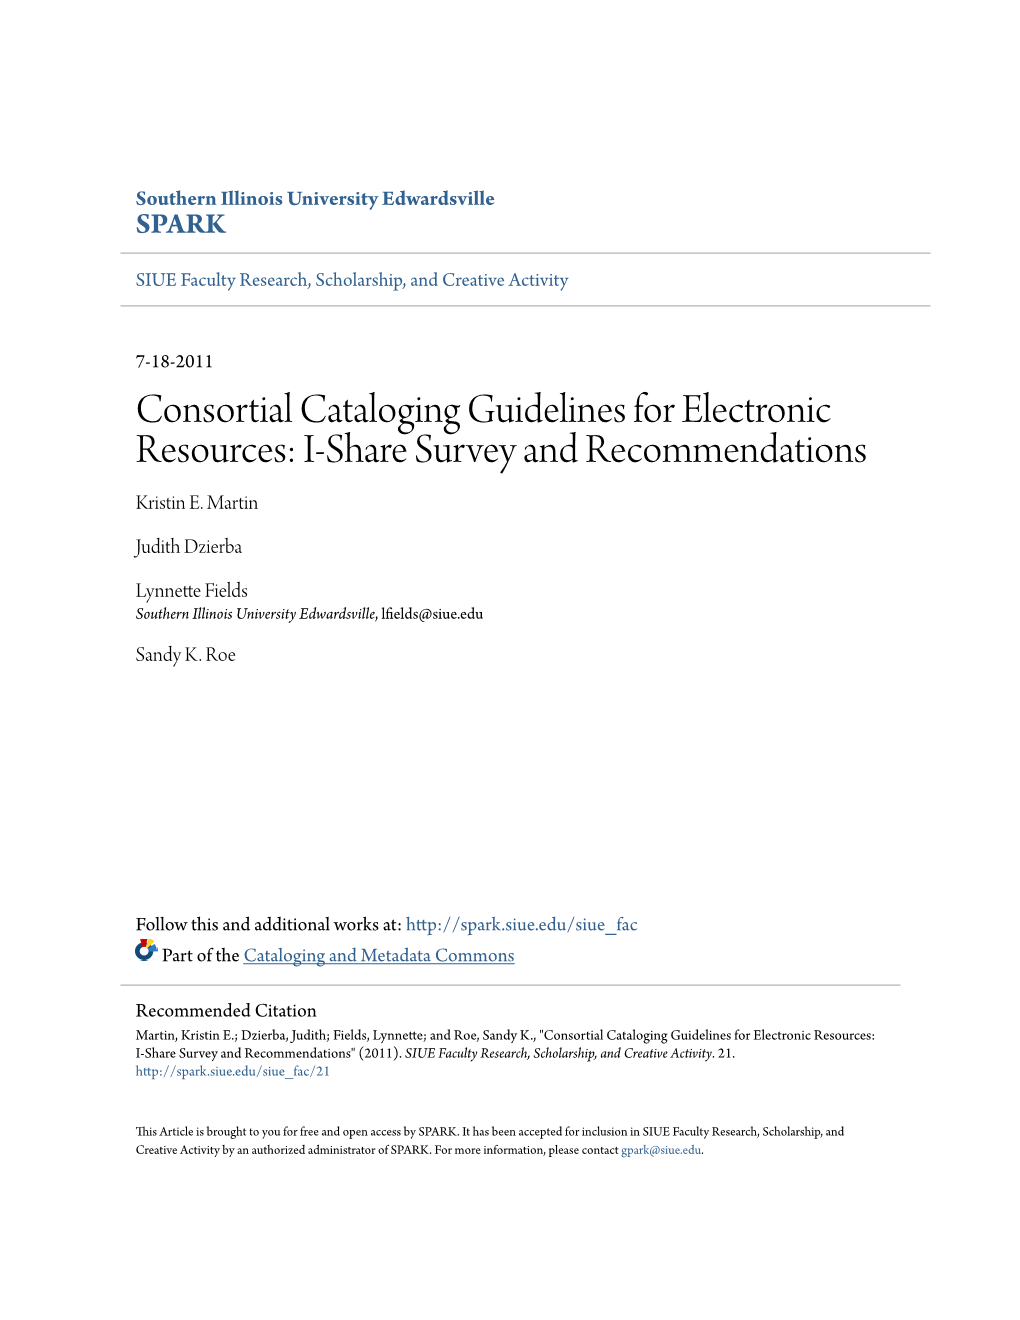 Consortial Cataloging Guidelines for Electronic Resources: I-Share Survey and Recommendations Kristin E